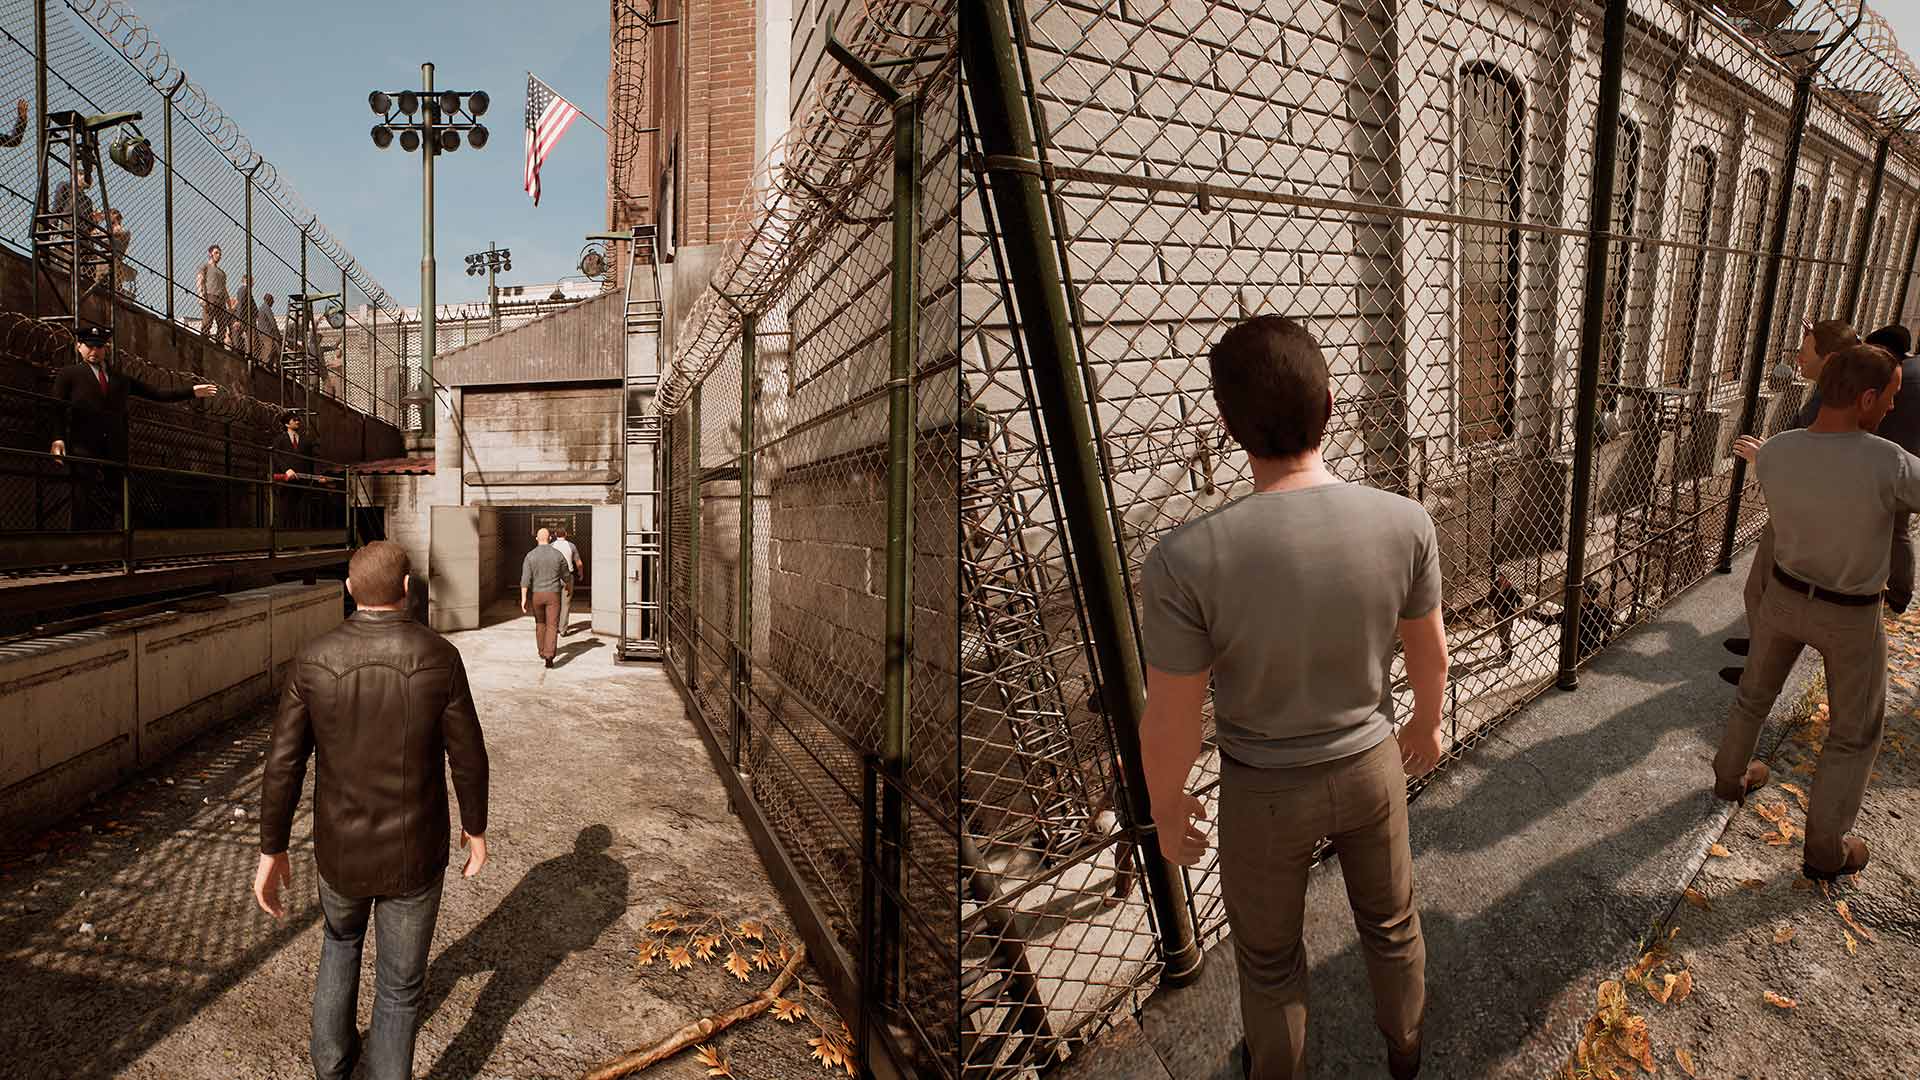 the way out video game